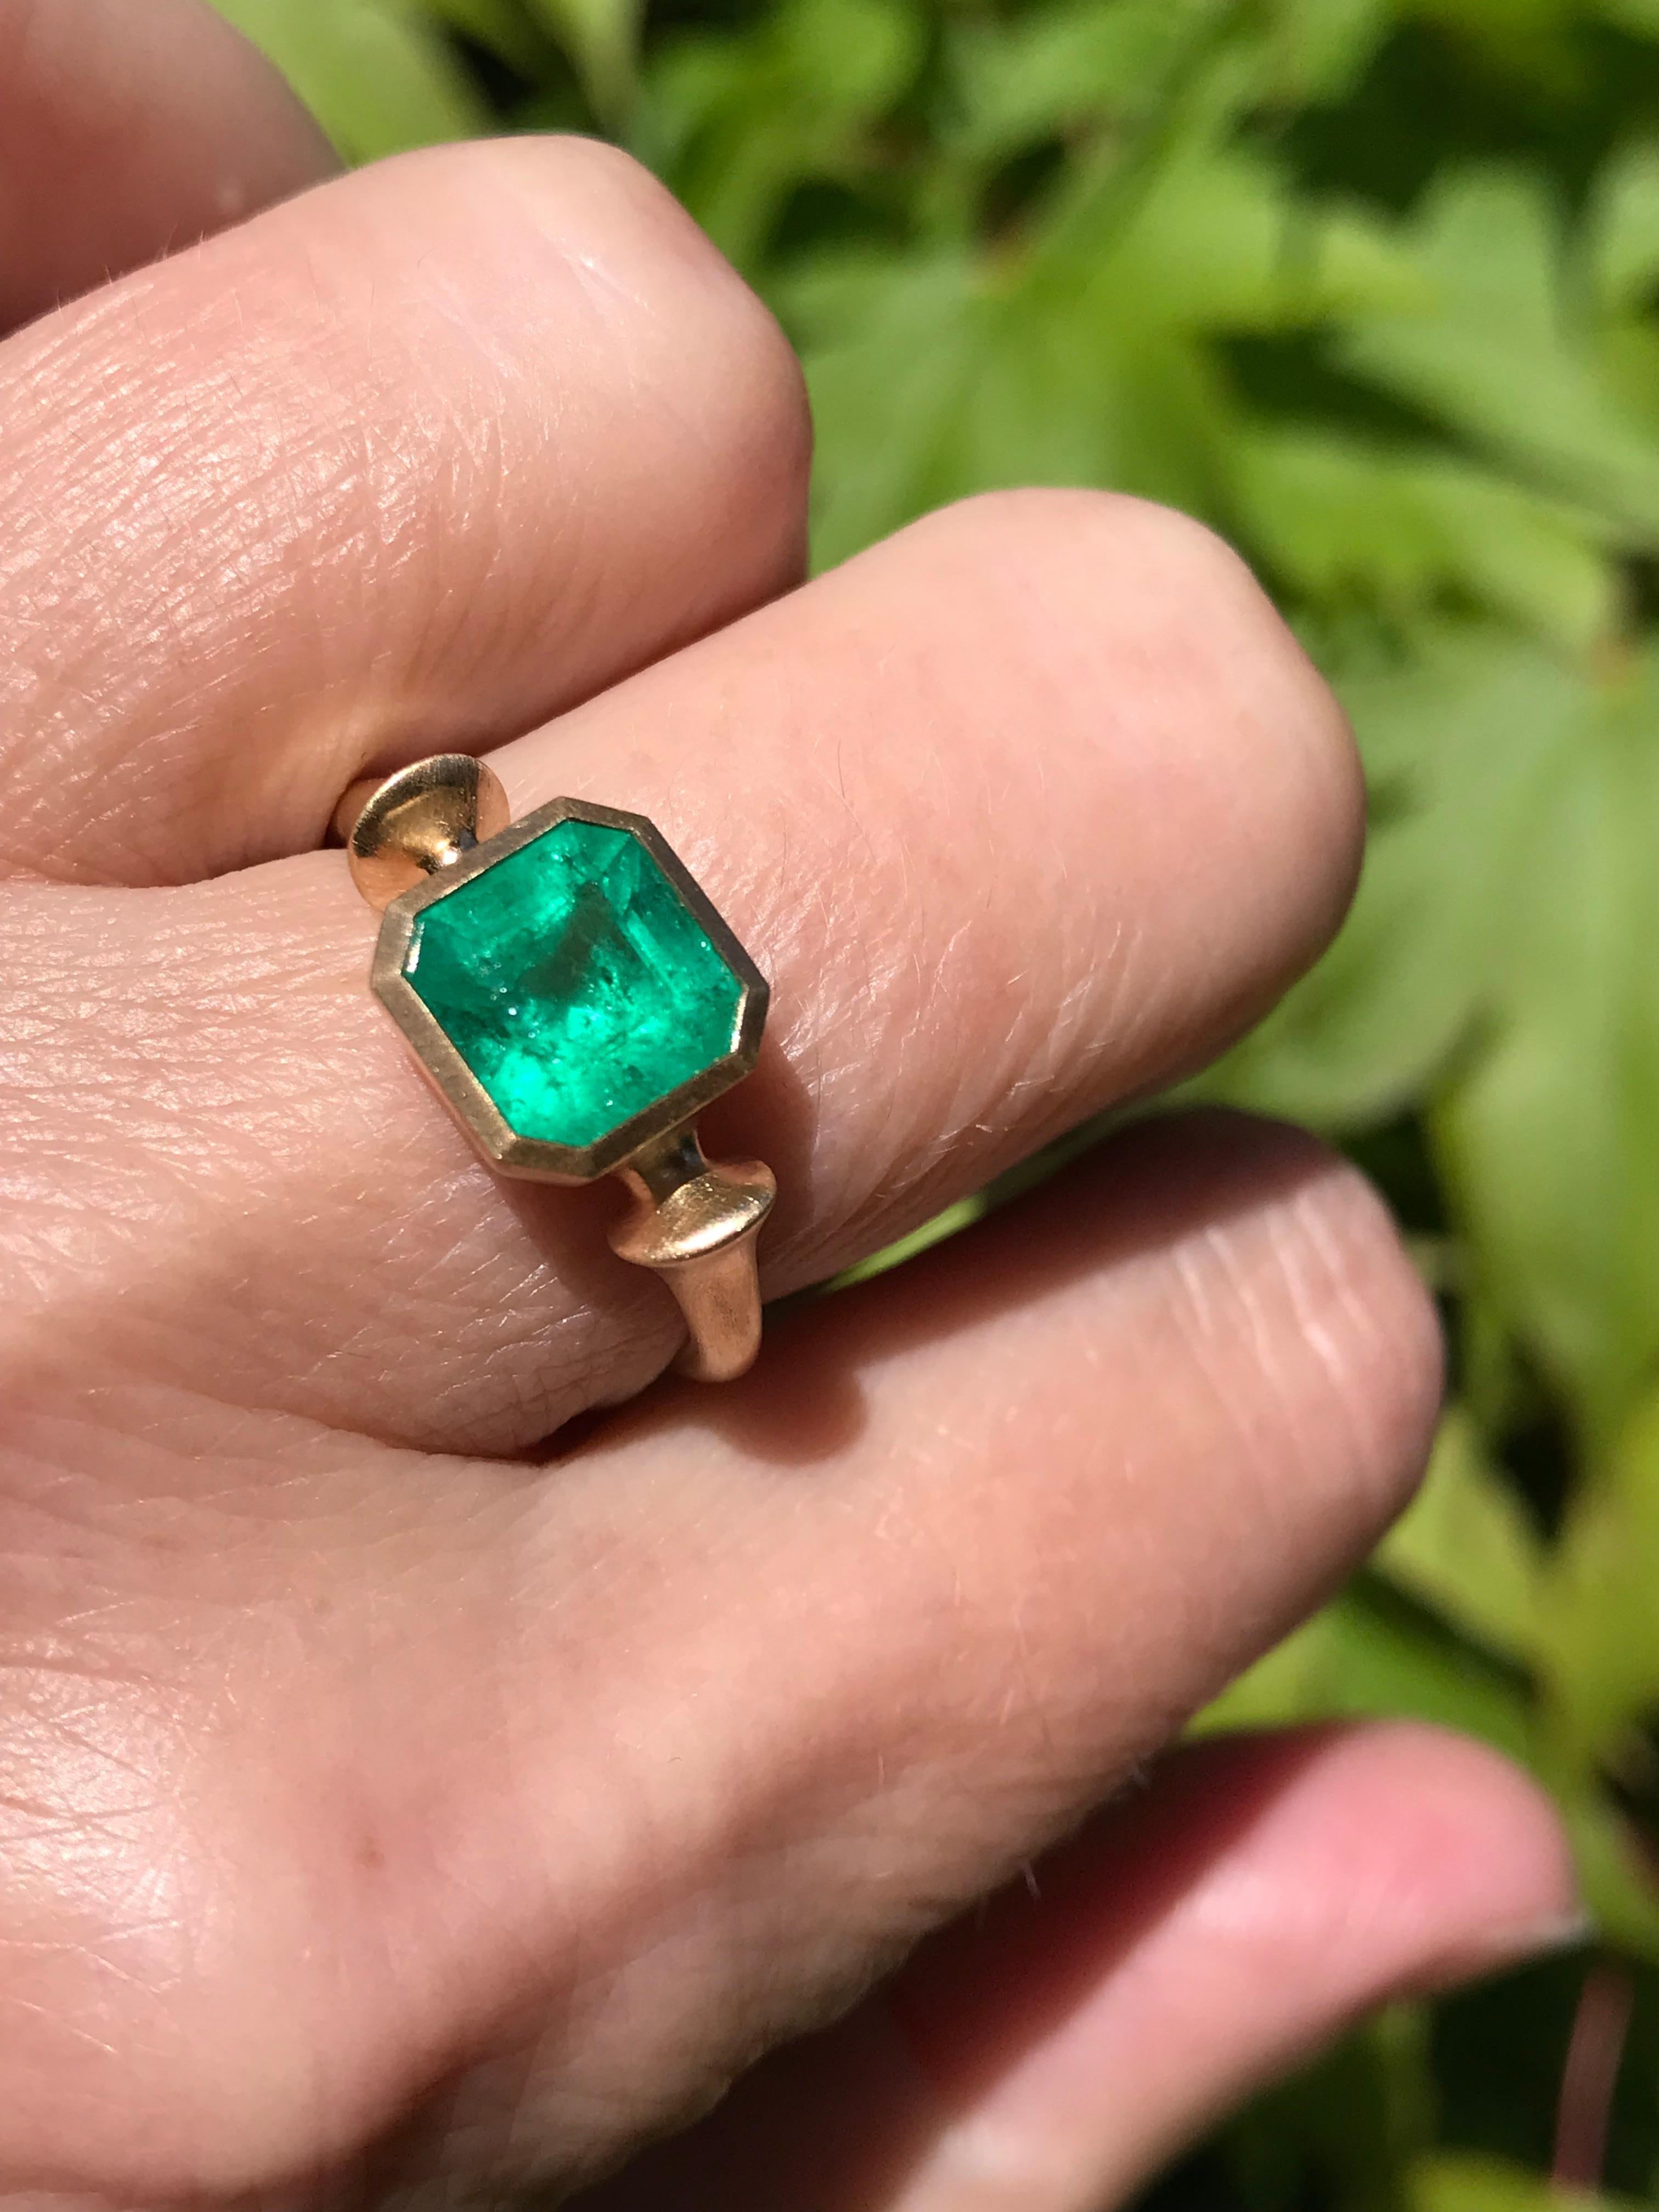 Dalben design One of a Kind 18k yellow gold satin finishing ring with a 1.92 carat emerald cut  emerald from Muzo mine in Colombia. 
Ring size6 3/4 USA , 54 EU  re-sizable to most finger sizes. 
Bezel stone dimensions :
width 8,9 mm
height 8,7